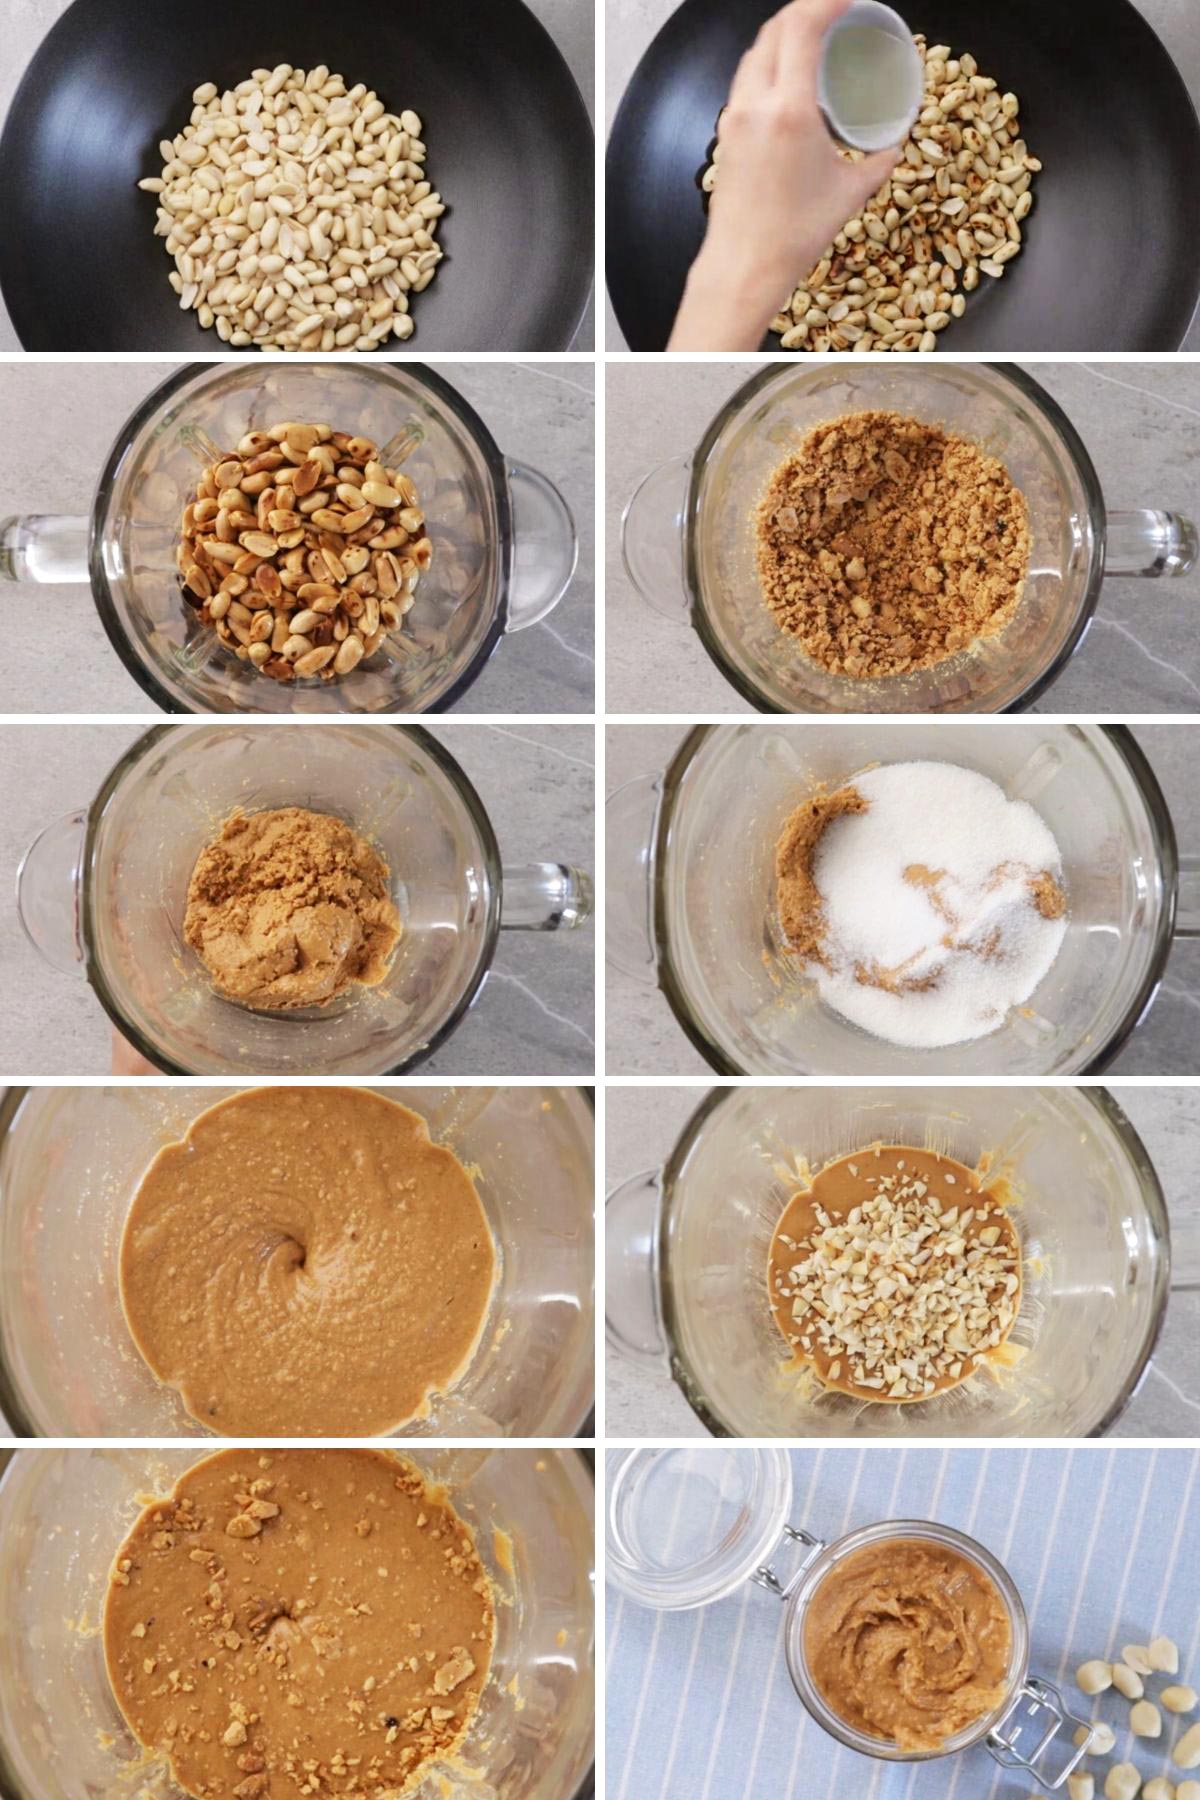 Steps on how to make homemade Peanut Butter.